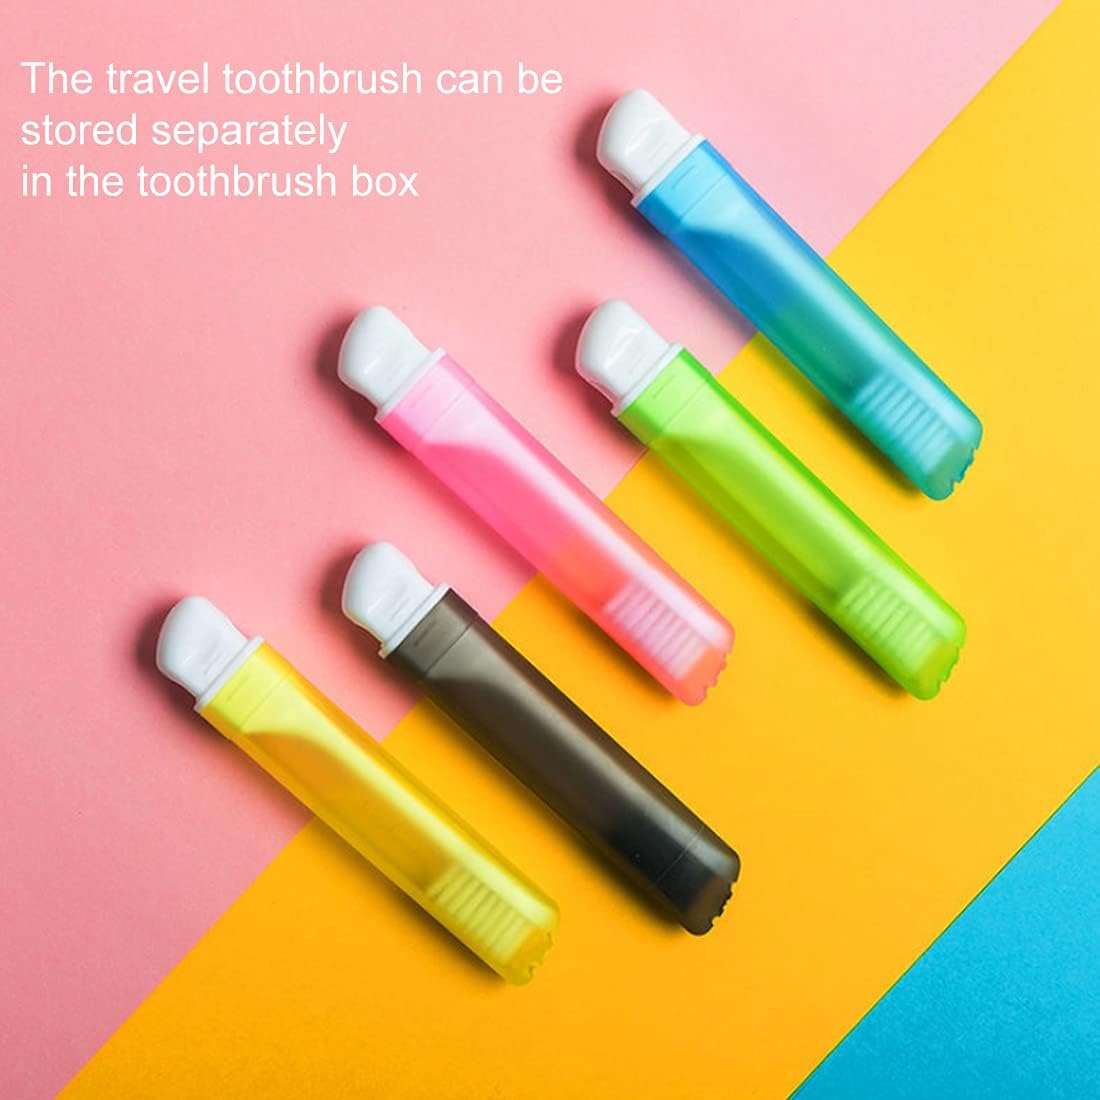 Showcasing all color variants of Foldable Toothbrush in folded form